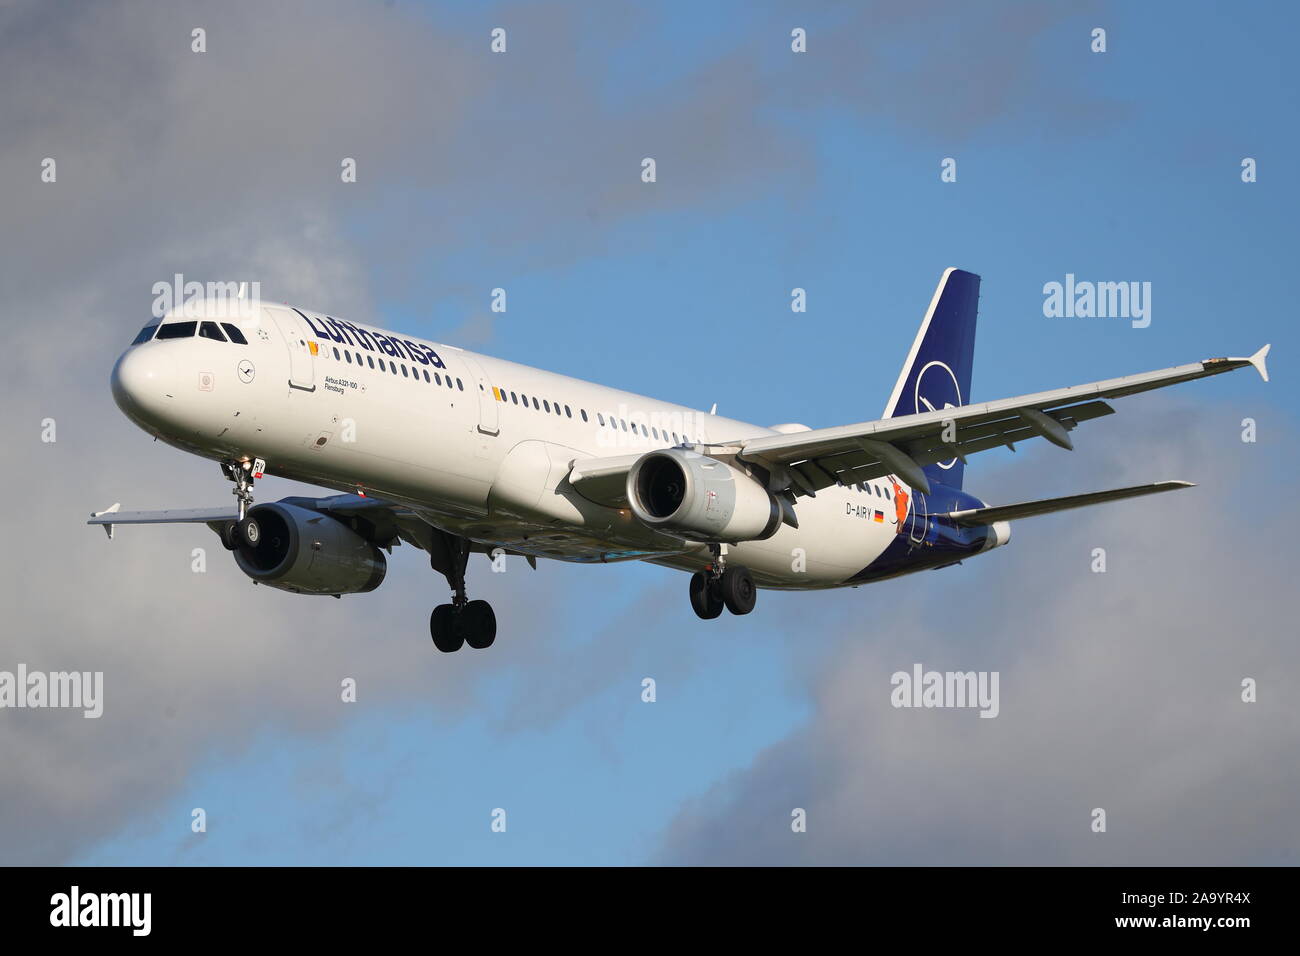 Lufthansa Airbus A321 D-AIRY in special livery sporting 'Die Maus', a children's cartoon character, landing at London Heathrow Airport, UK Stock Photo